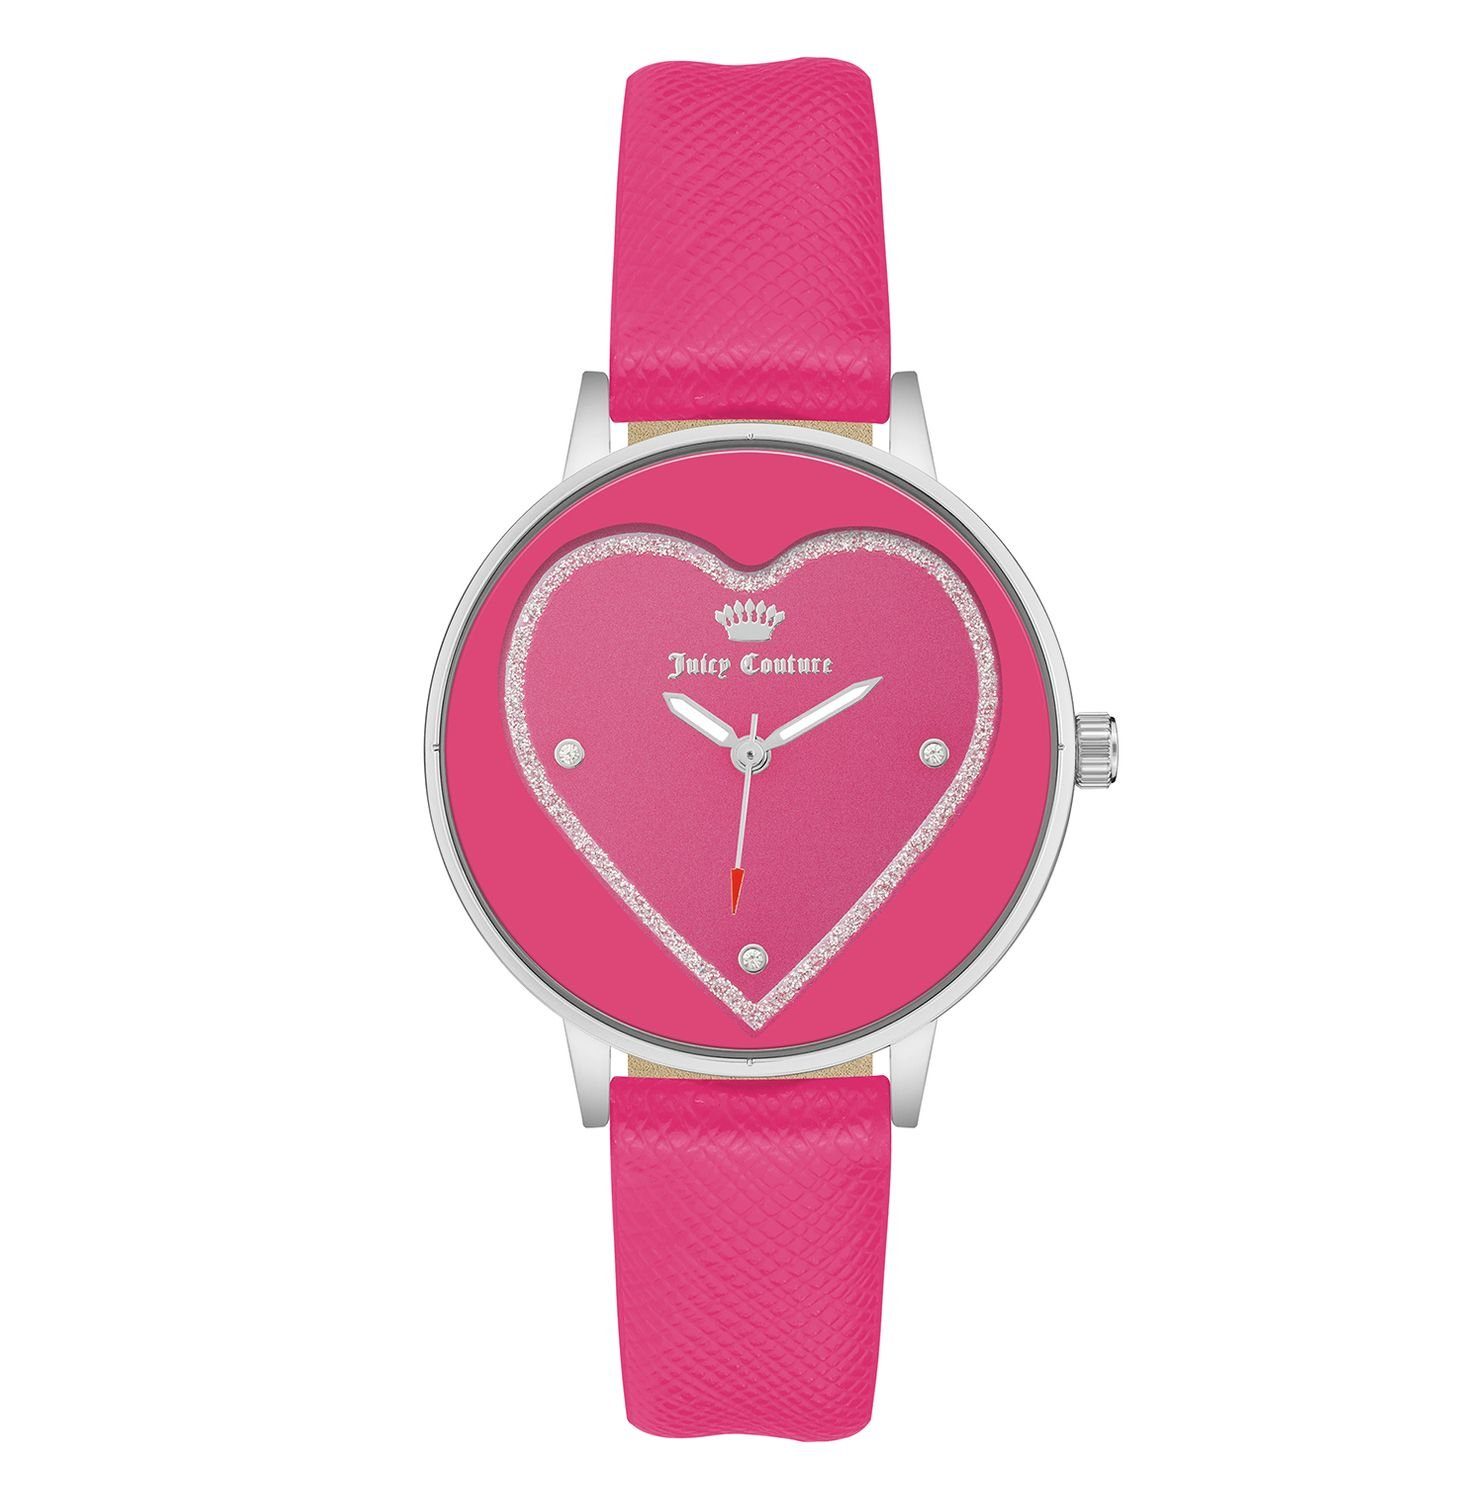 Digitaluhr Juicy Couture JC/1235SVHP